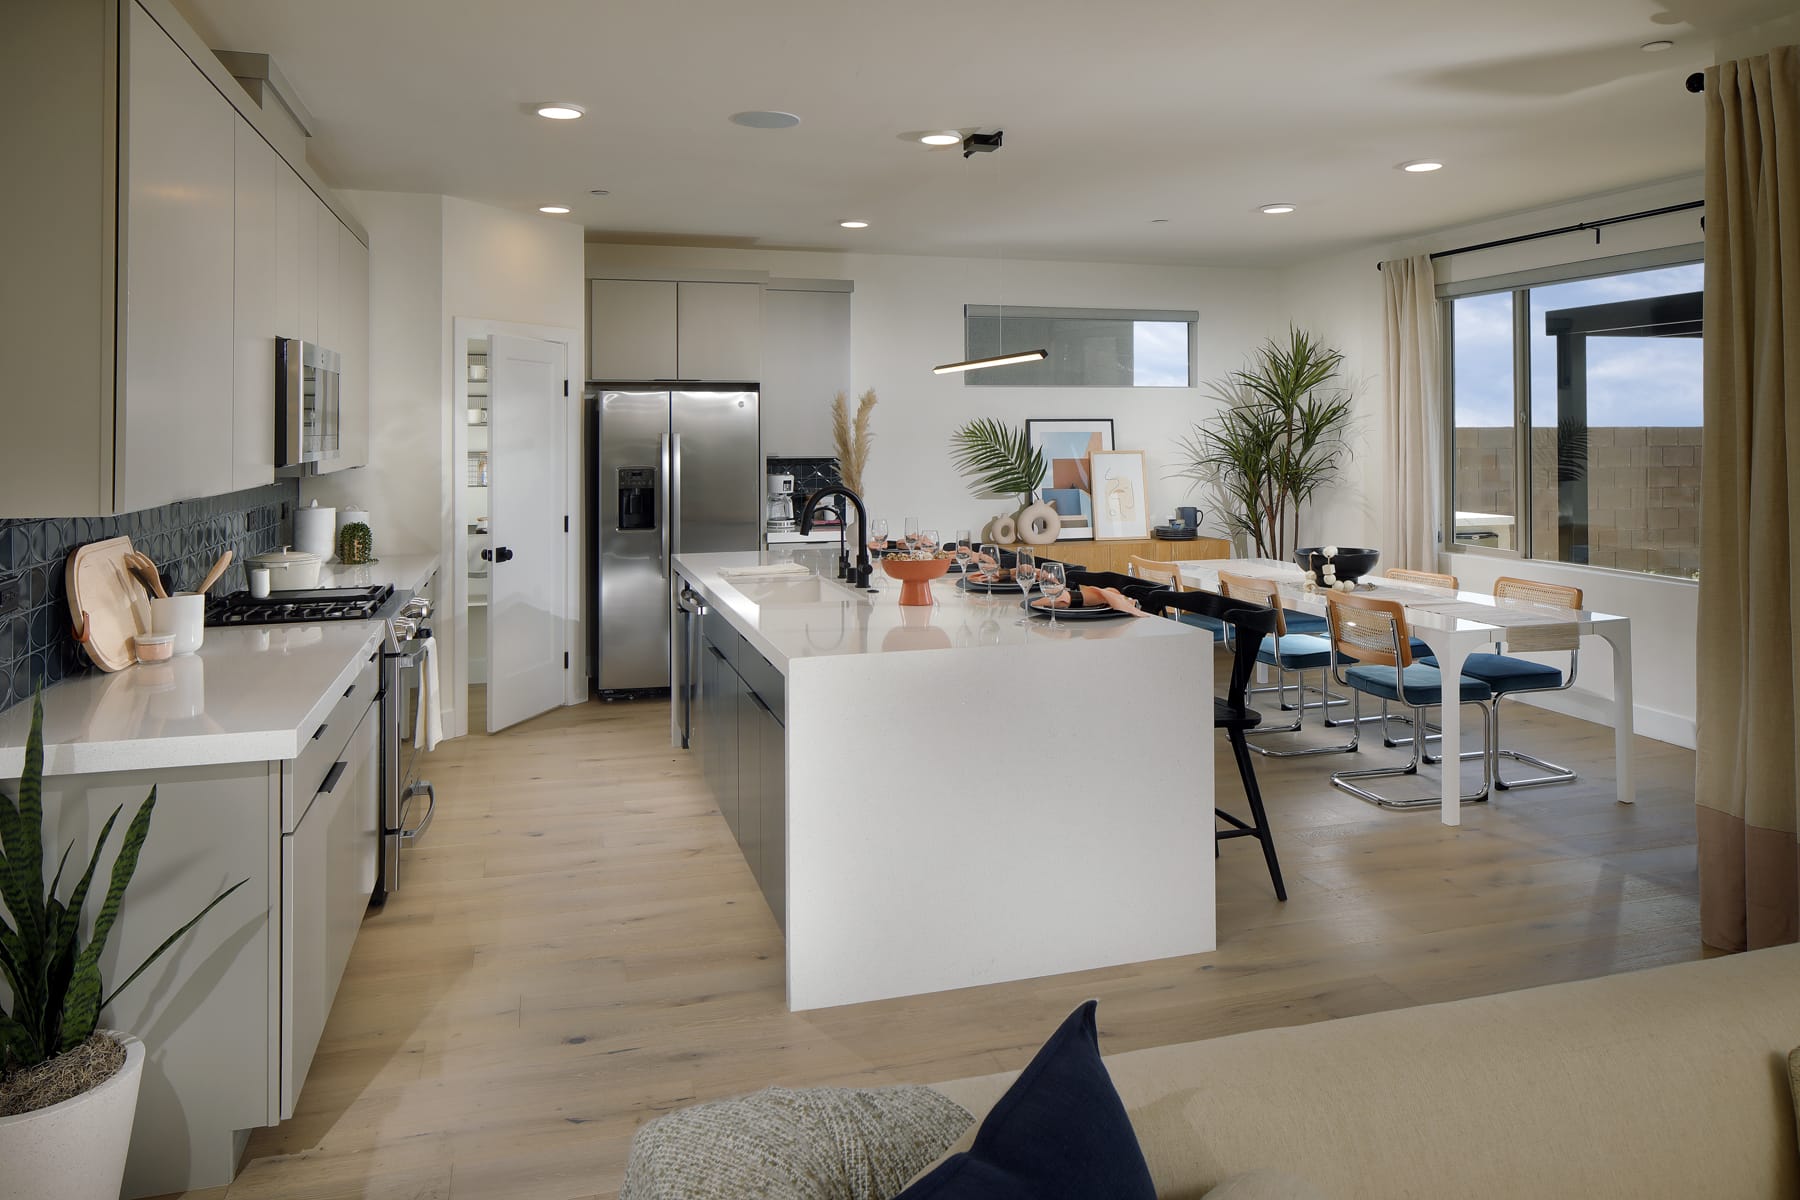 Kitchen of Plan 2 at Arroyos Edge by Tri Pointe Homes